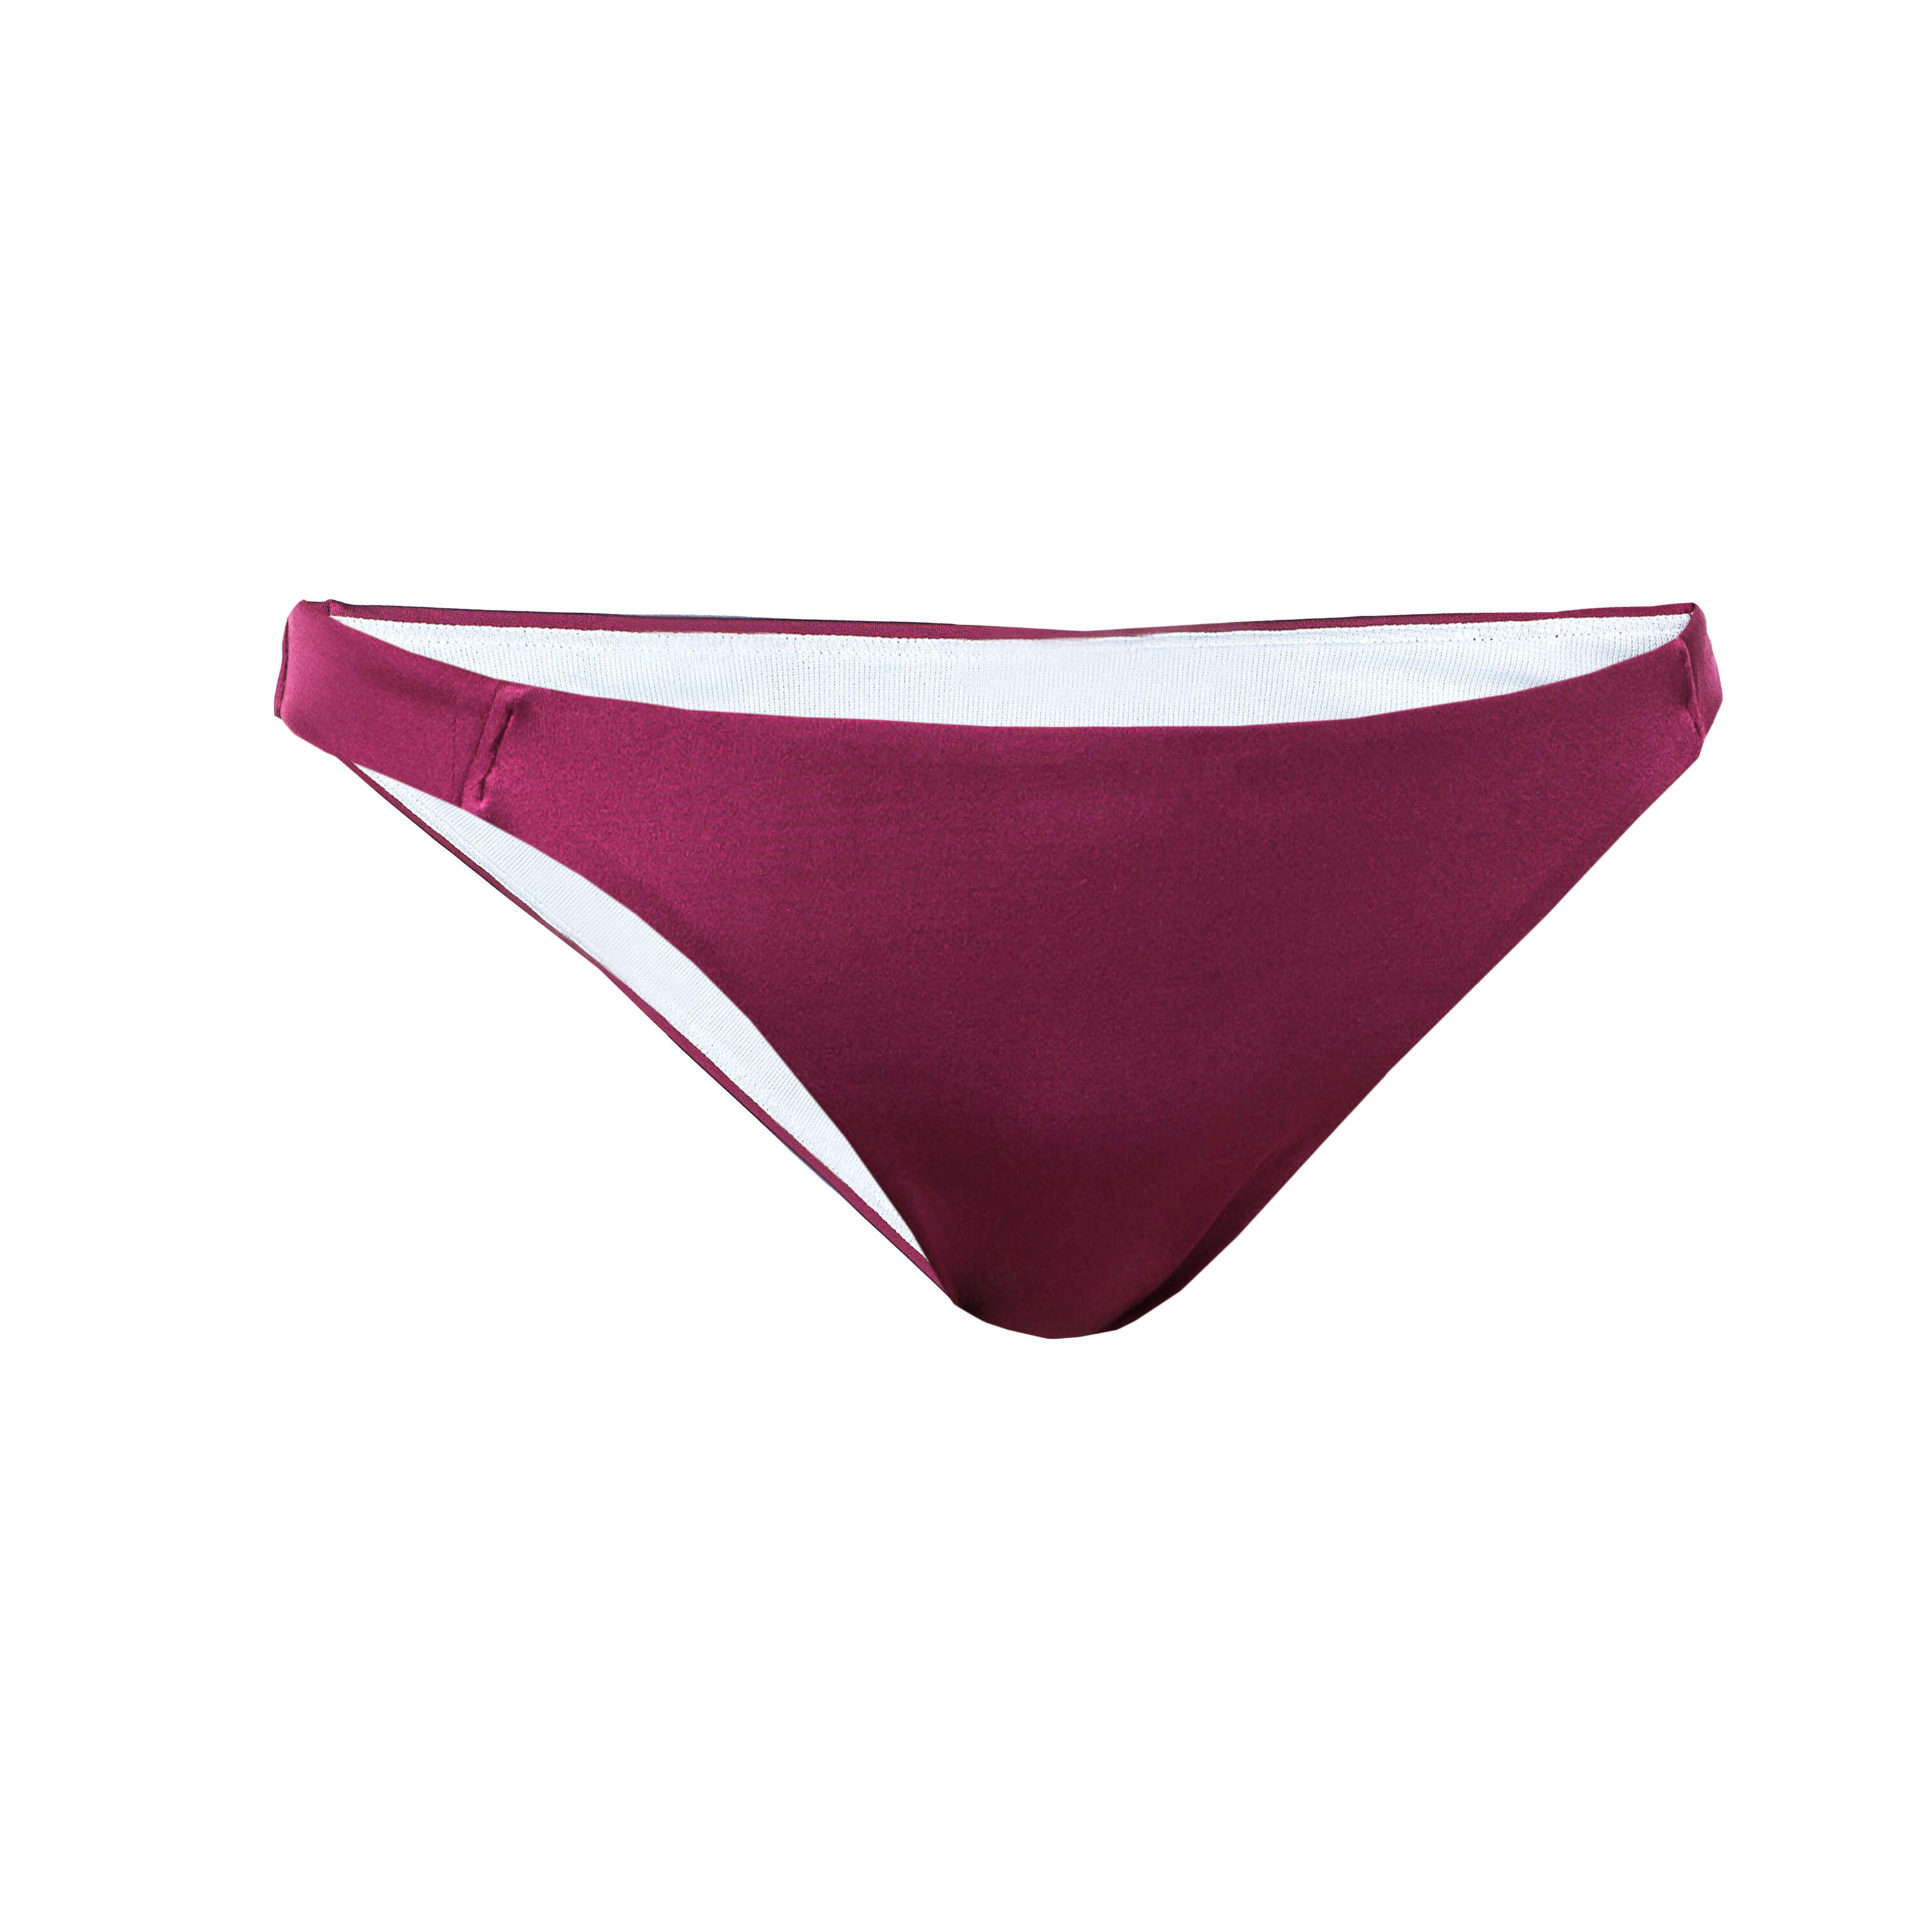 Women's Classic Swimsuit Bottoms with Thin Edges ALY - BURGUNDY 2/9